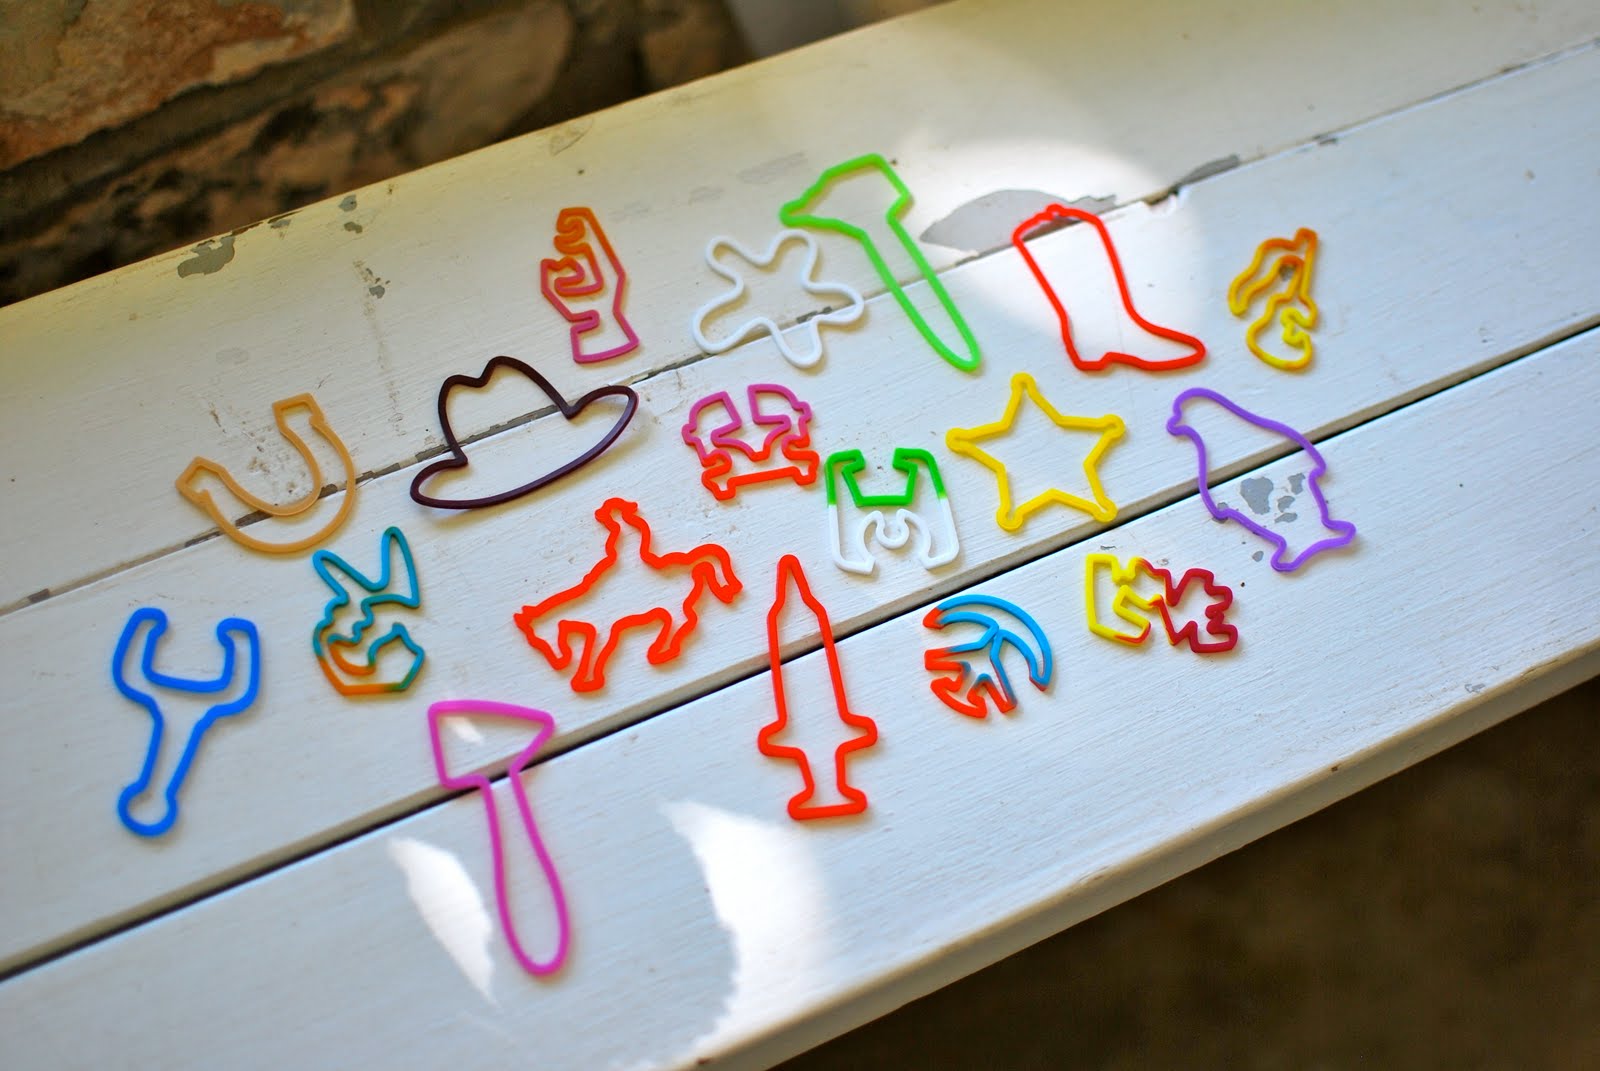 Local kids get a kick out of collecting, trading Silly Bandz